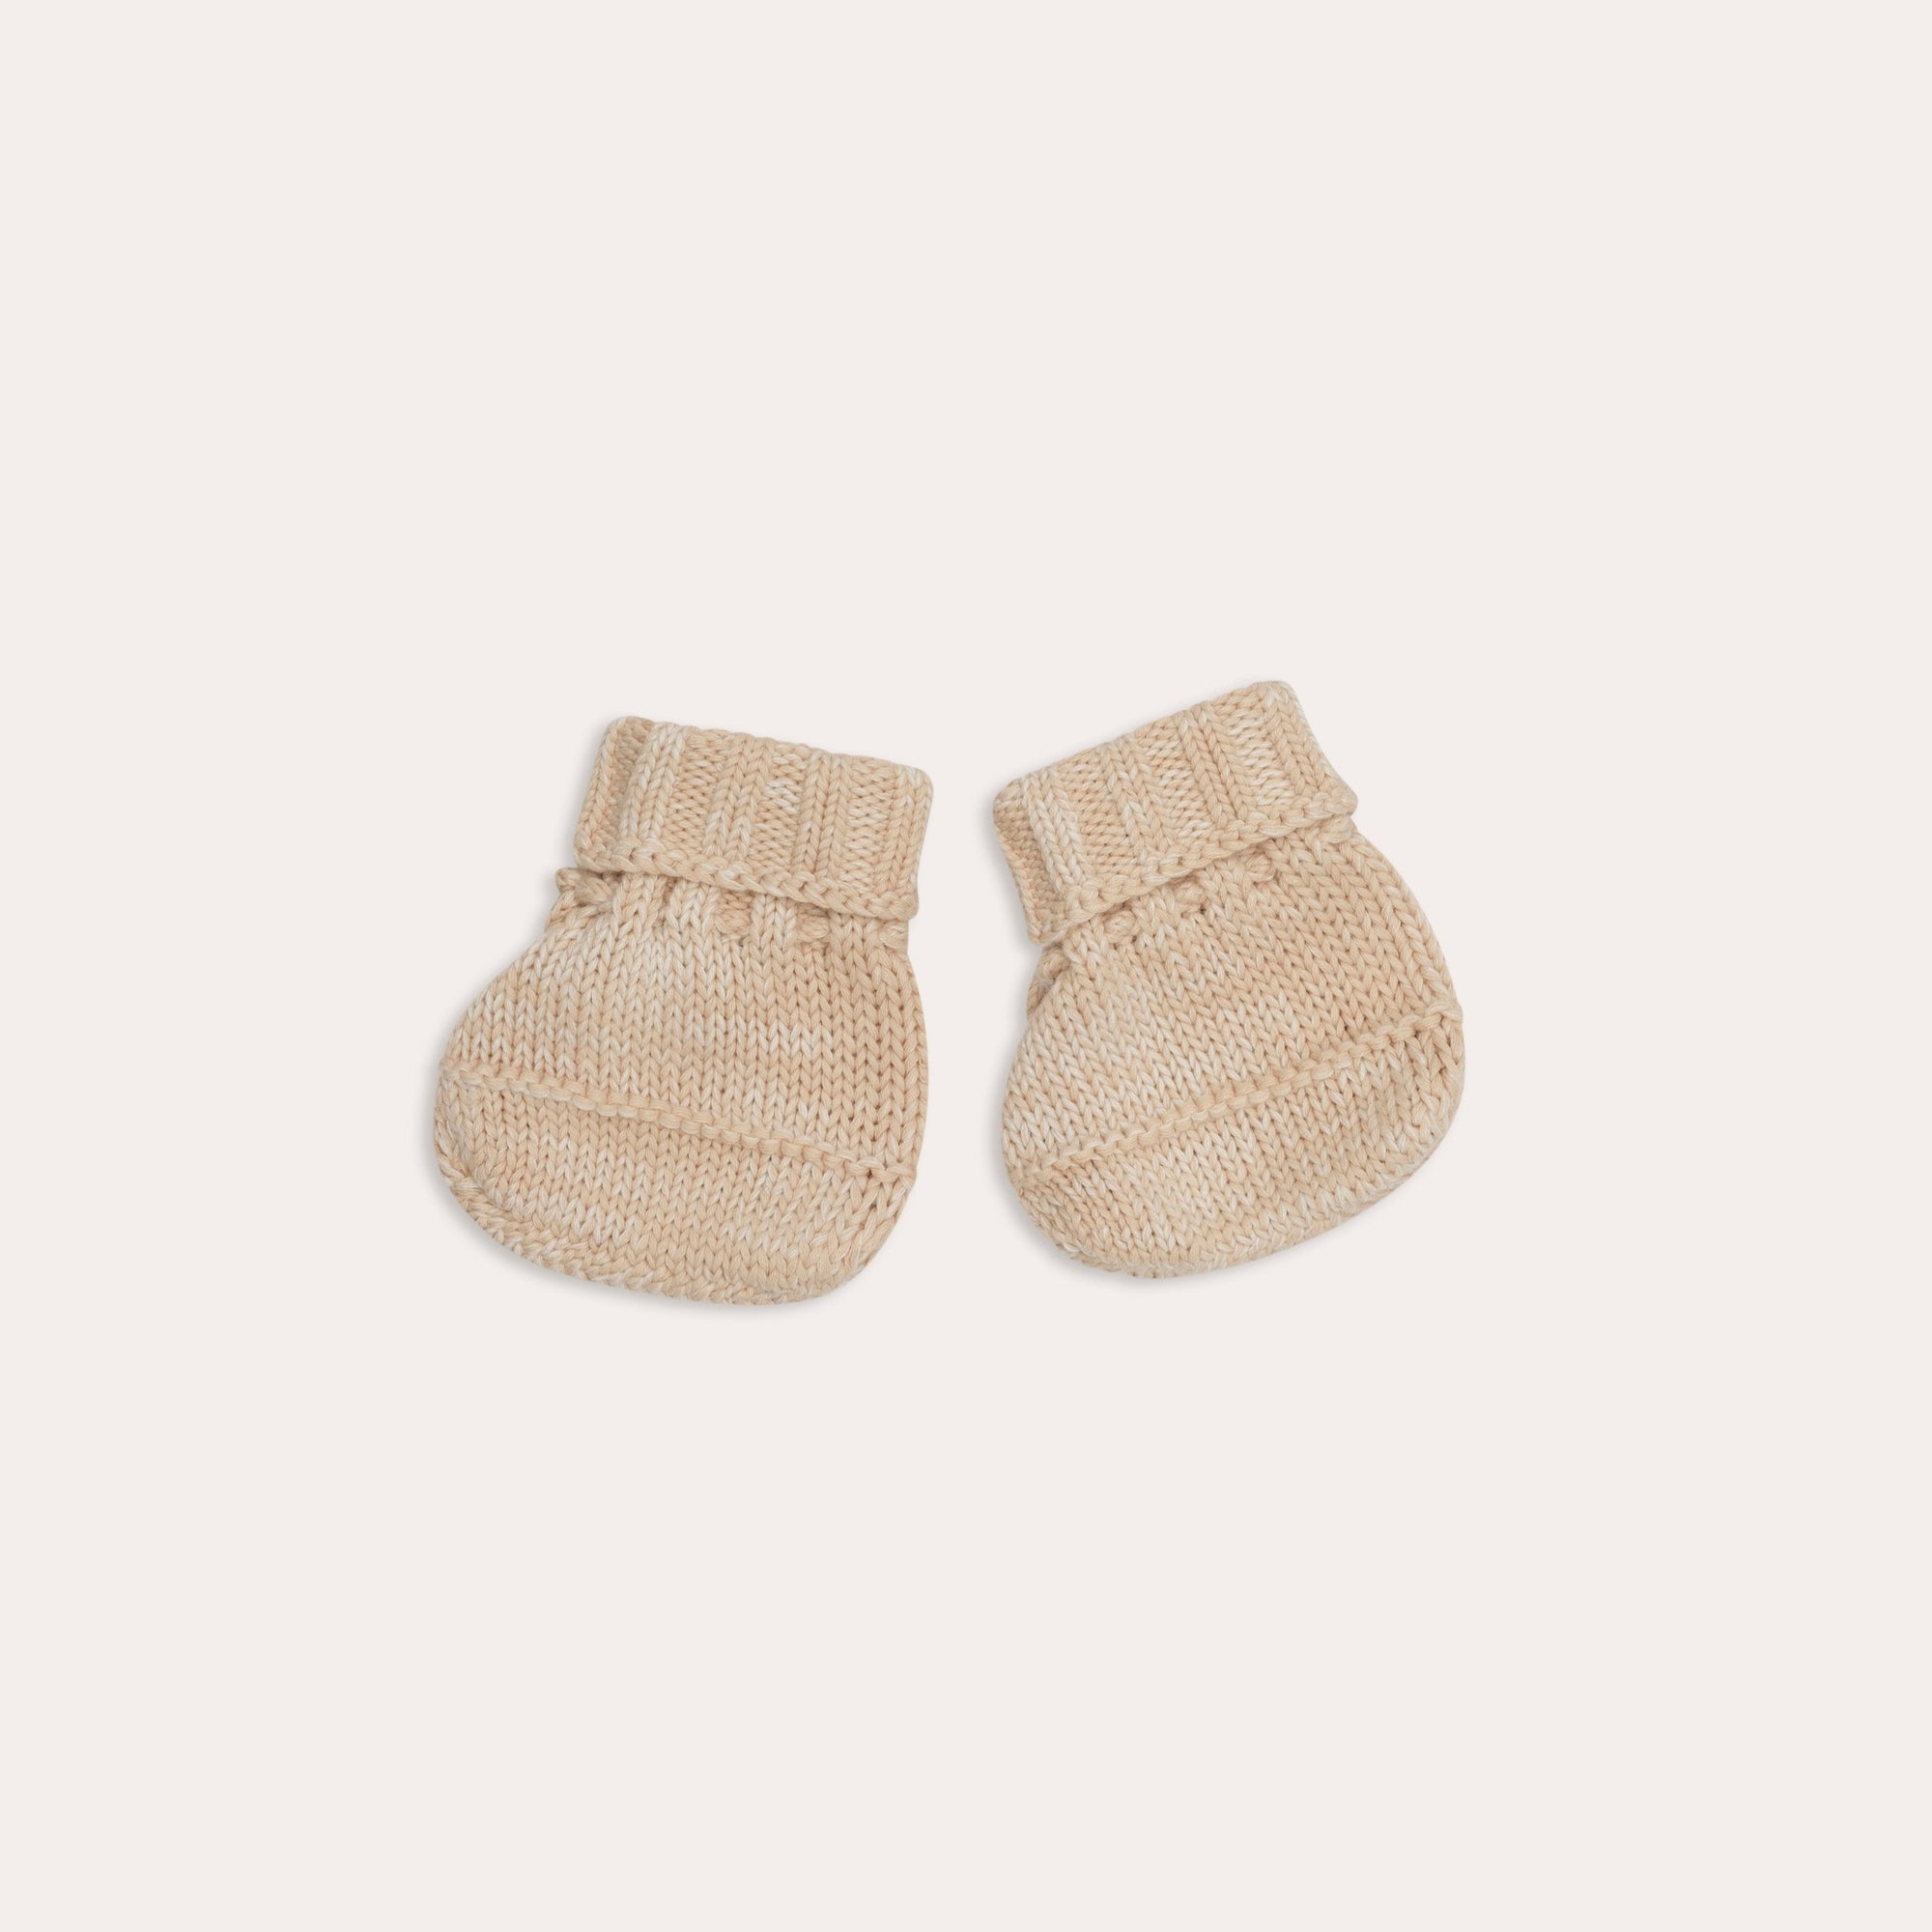 A pair of Illoura the Label beige baby socks on a white background.